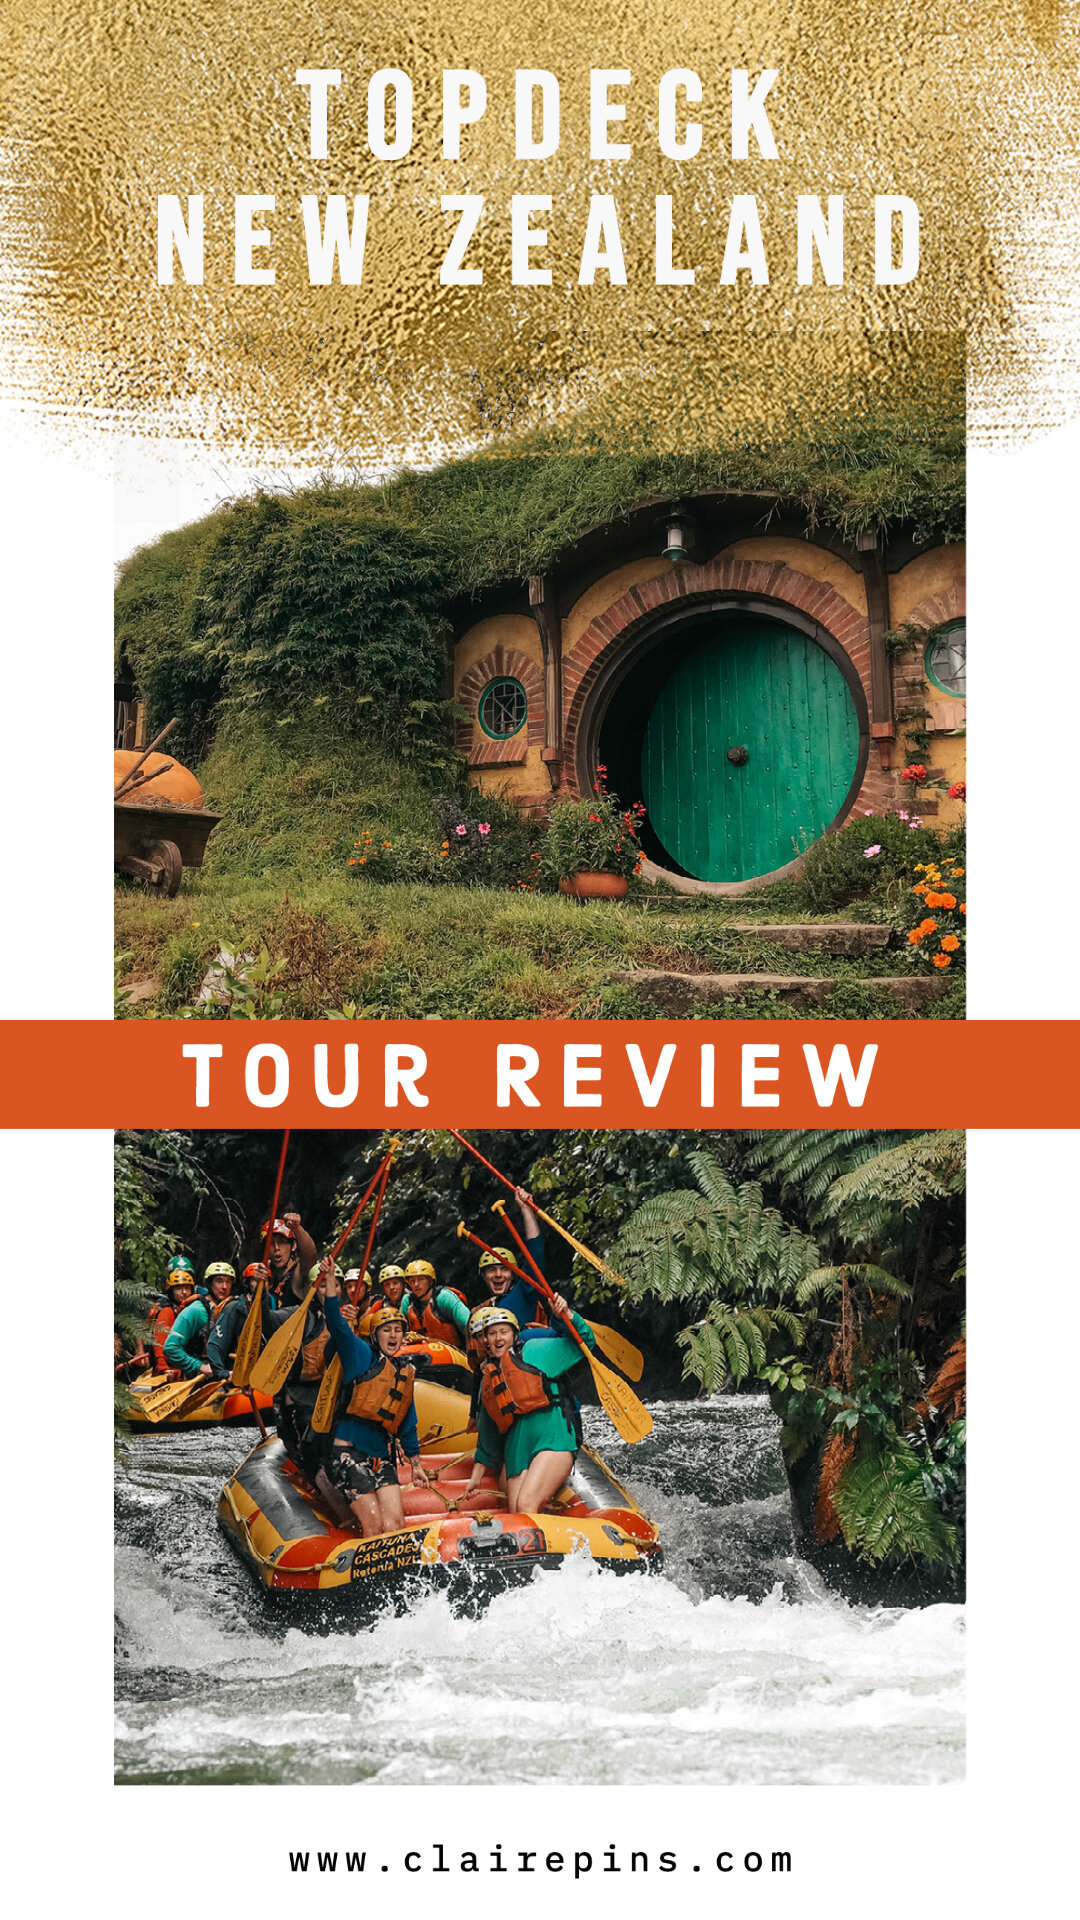 Topdeck New Zealand Tour Review copy 2.jpg